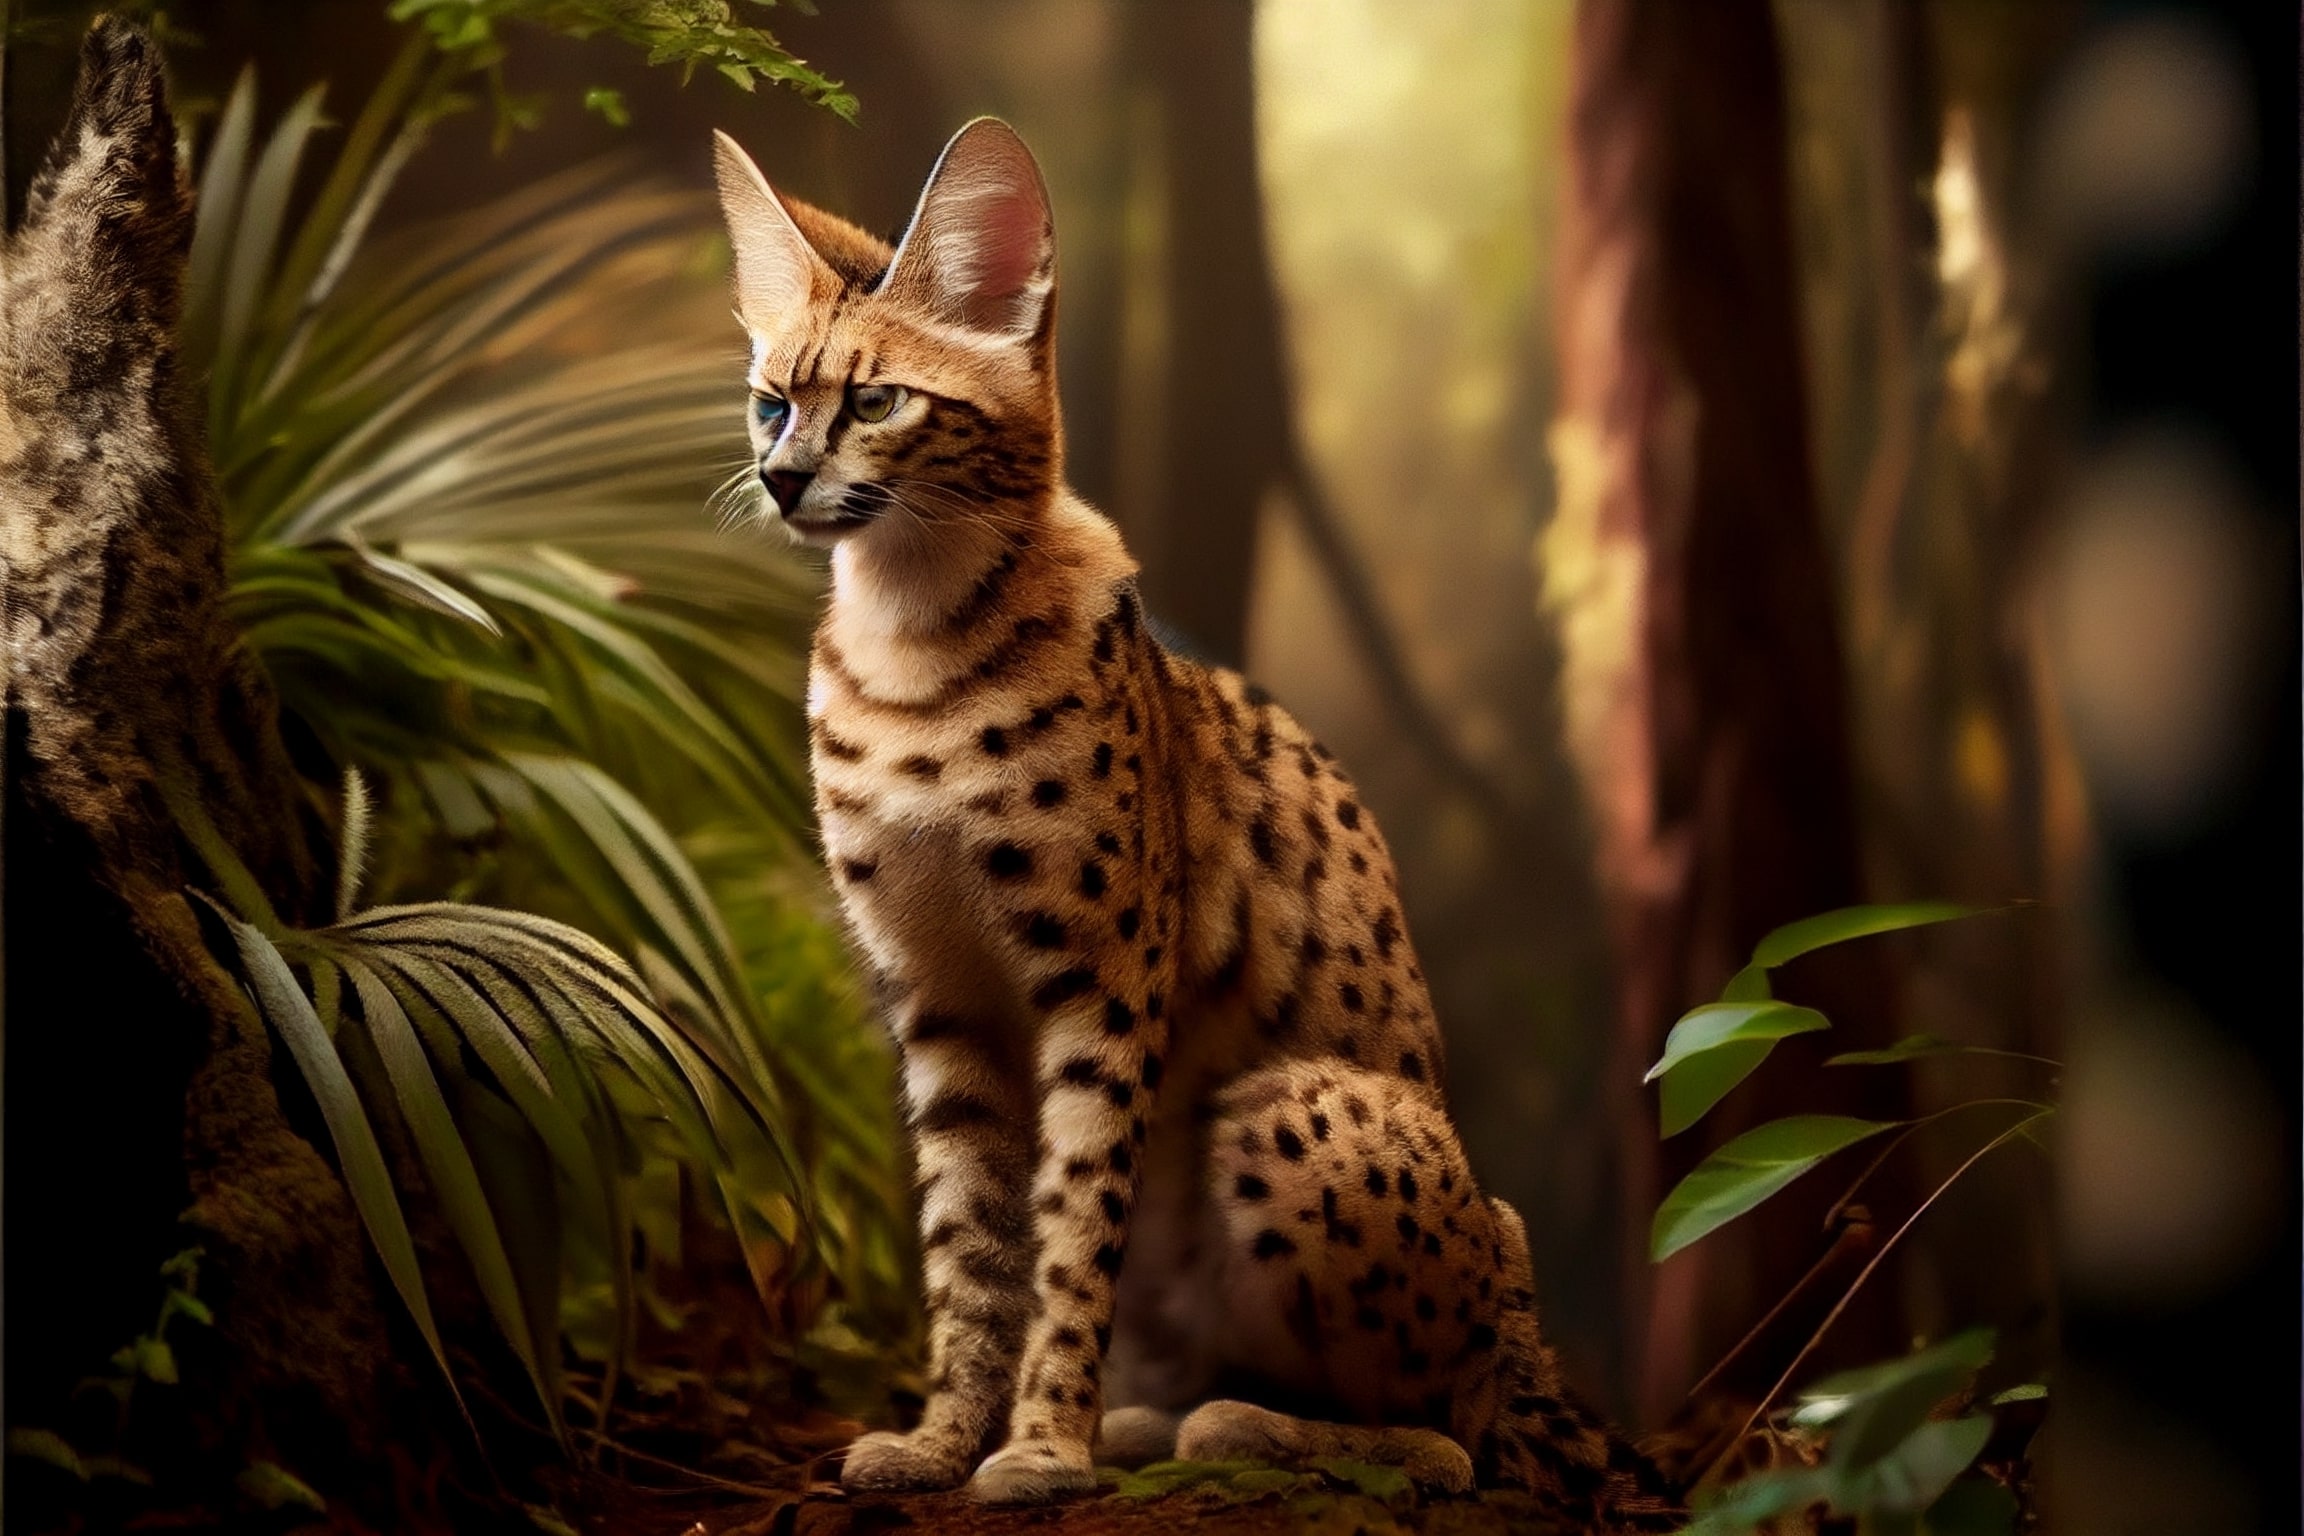 digitaldoodles realistic photography a serval cat in the forest 150c1174 5873 41a6 9657 b5f47adaec25 230